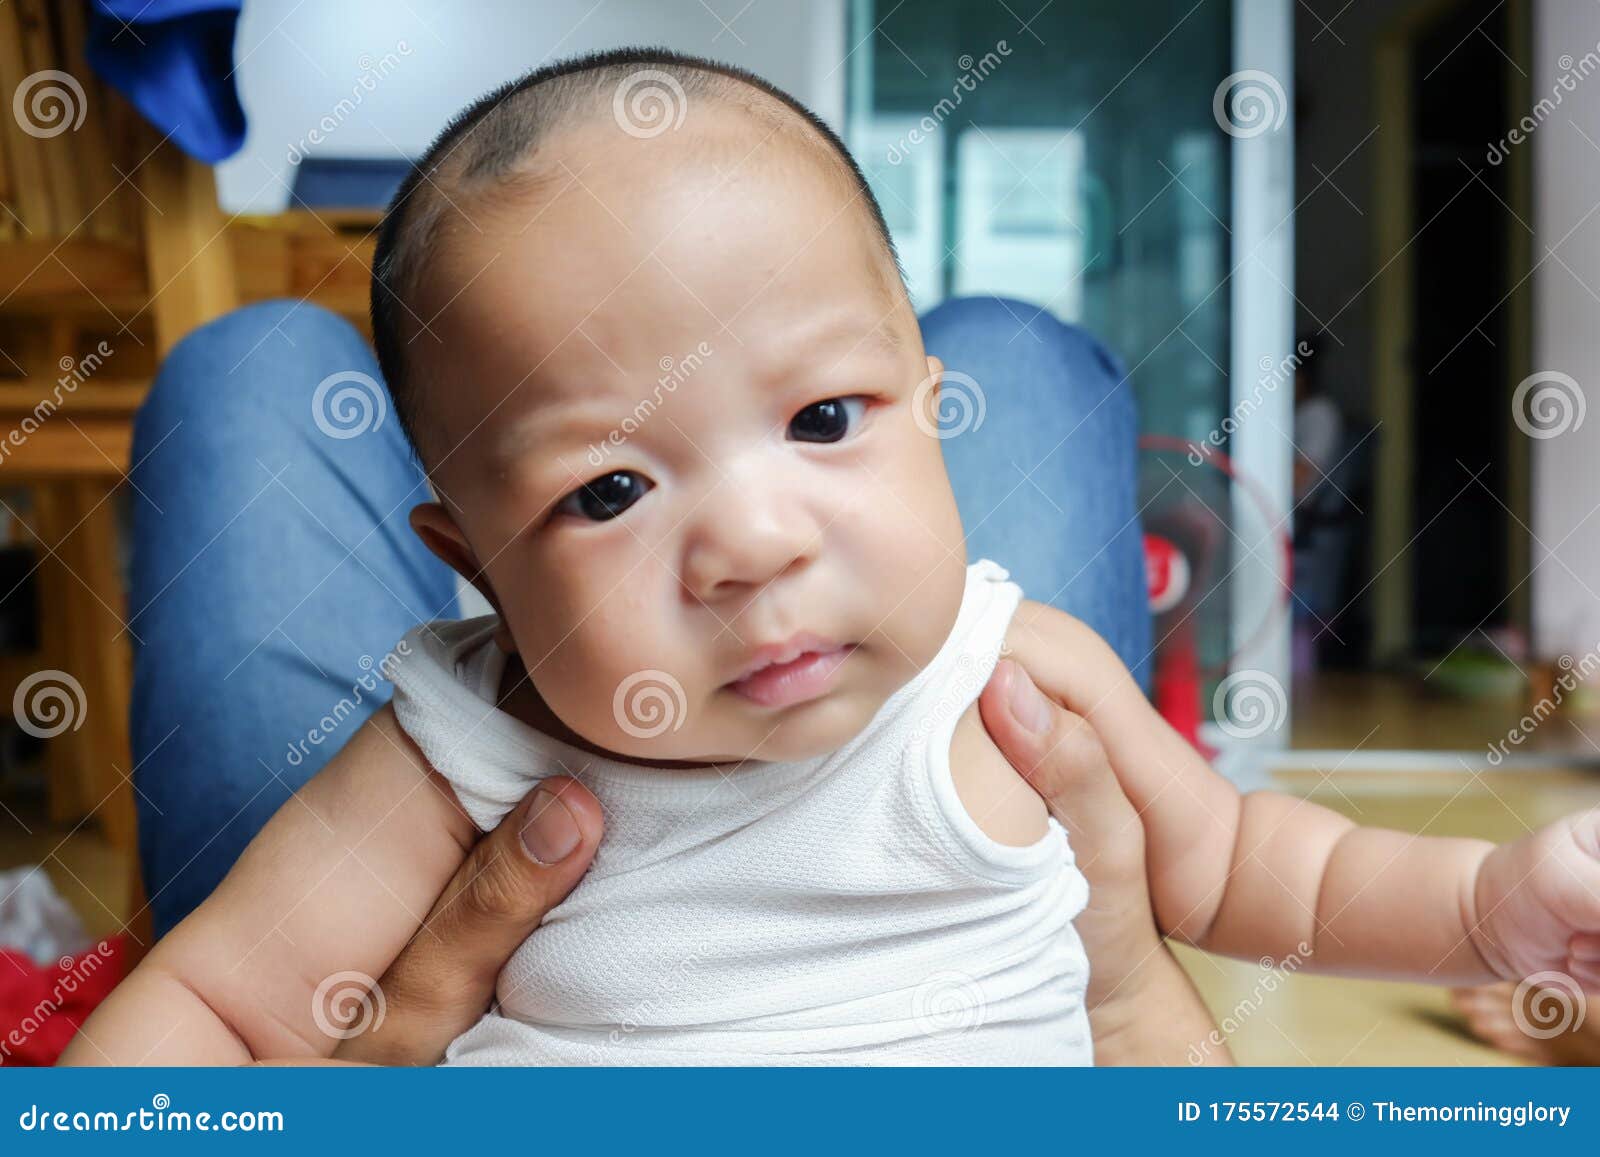 Father Hand Hold Infant Baby Boy Stock Photo - Image of adorable ...